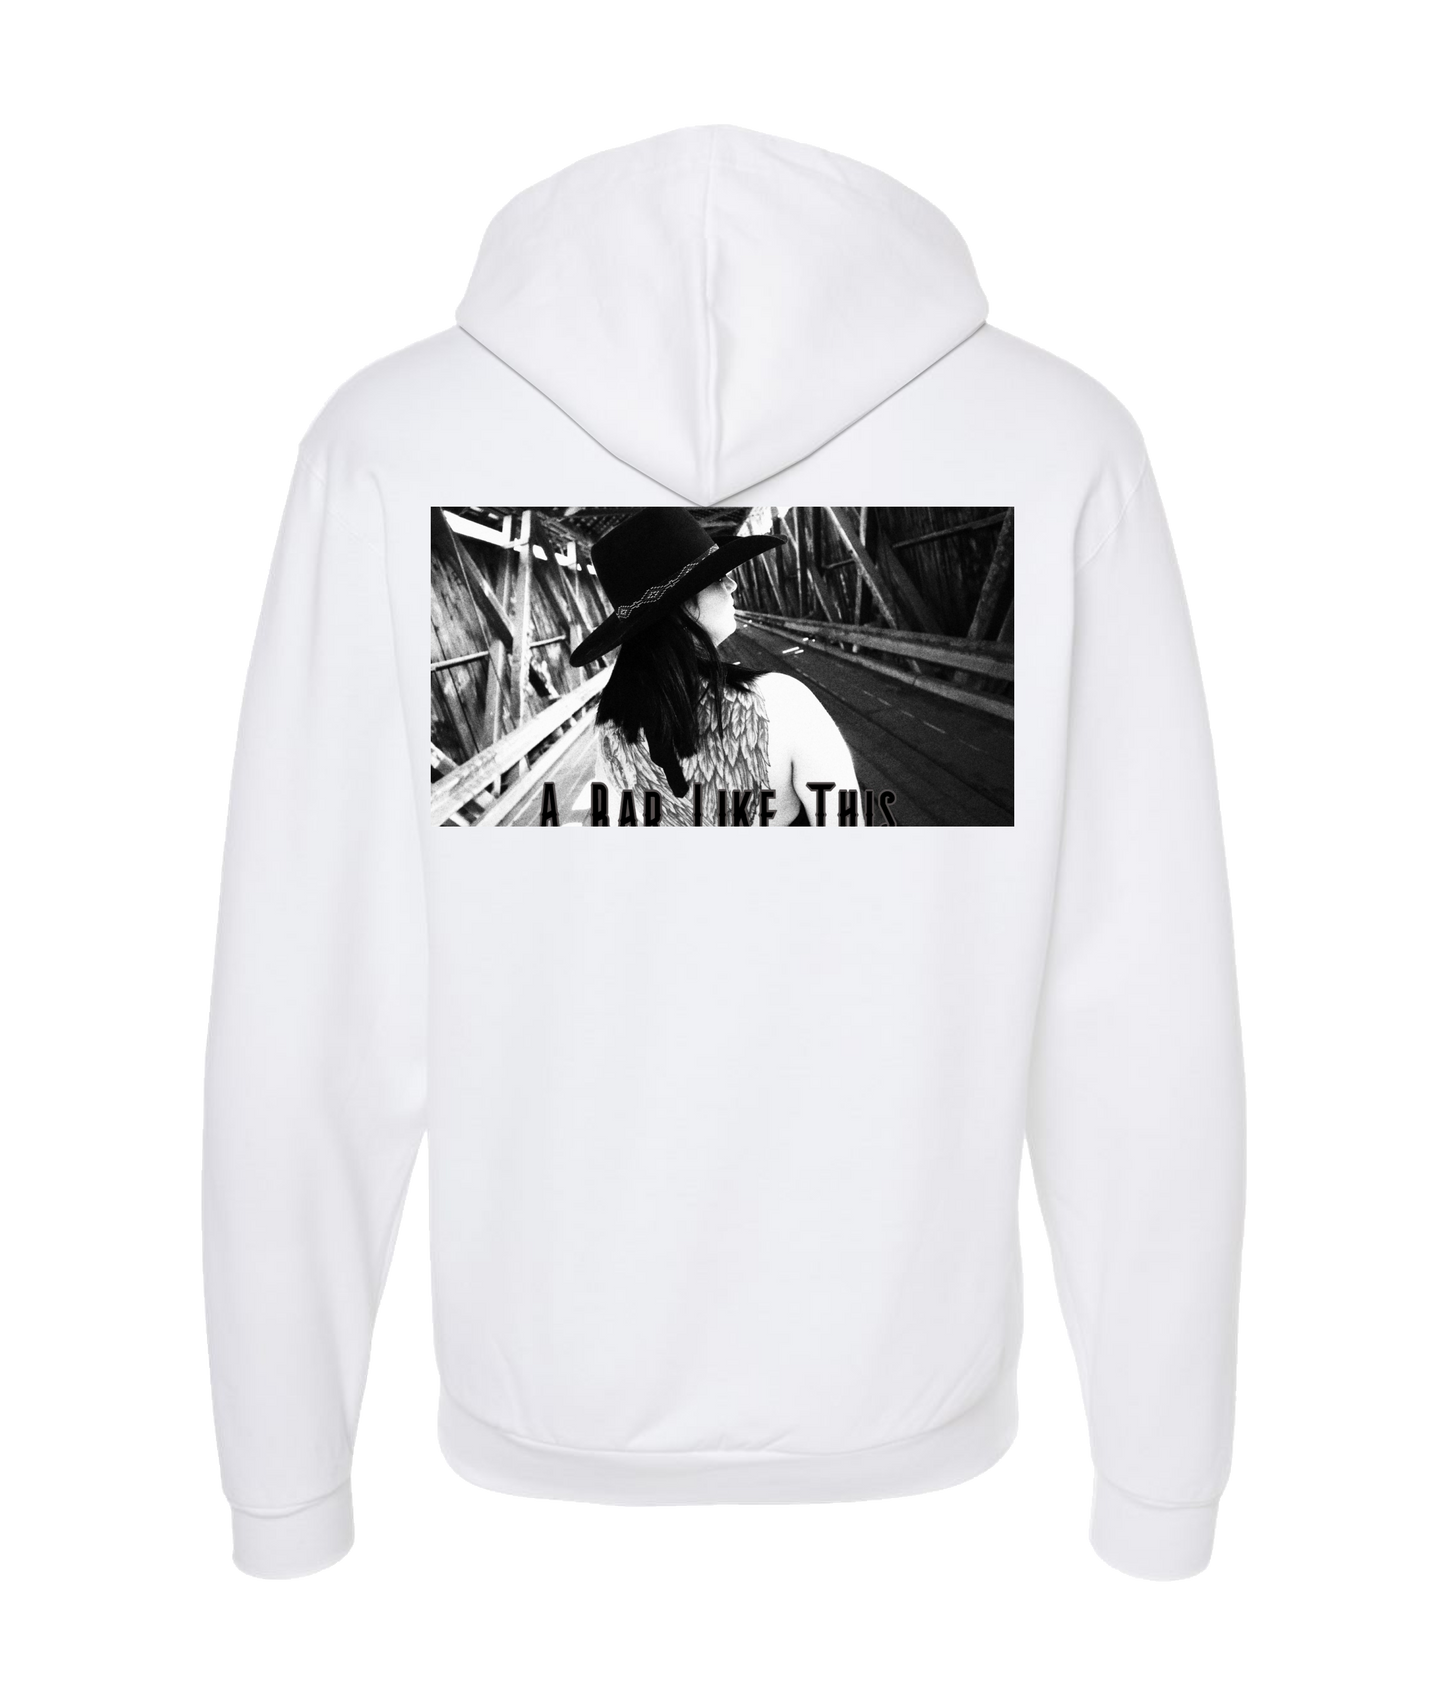 Michael Cage - A Bar Like This - White Zip Up Hoodie